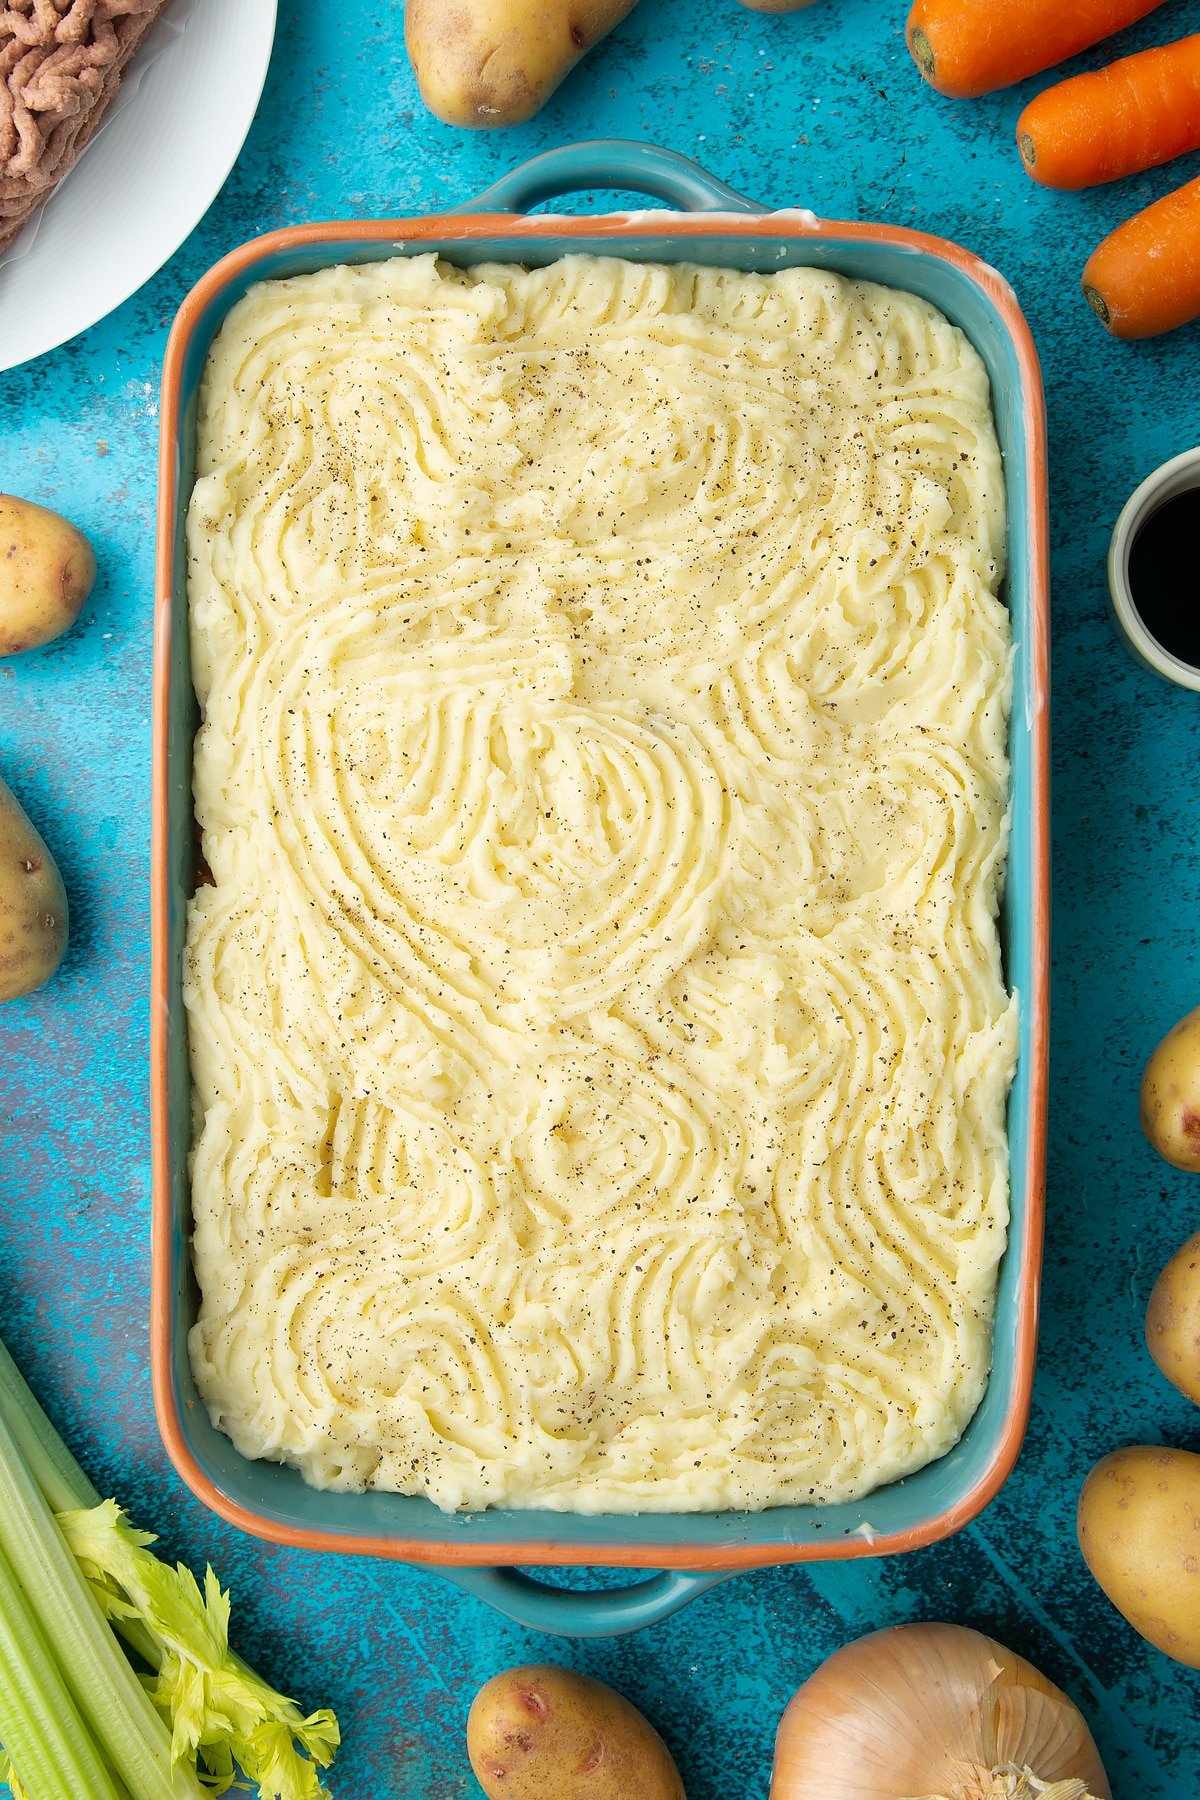 Meat free cottage pie filling topped with mashed potato in a roasting dish. The potato has been textured with a fork and seasoned with pepper. Ingredients to make vegan cottage pie surround the dish.